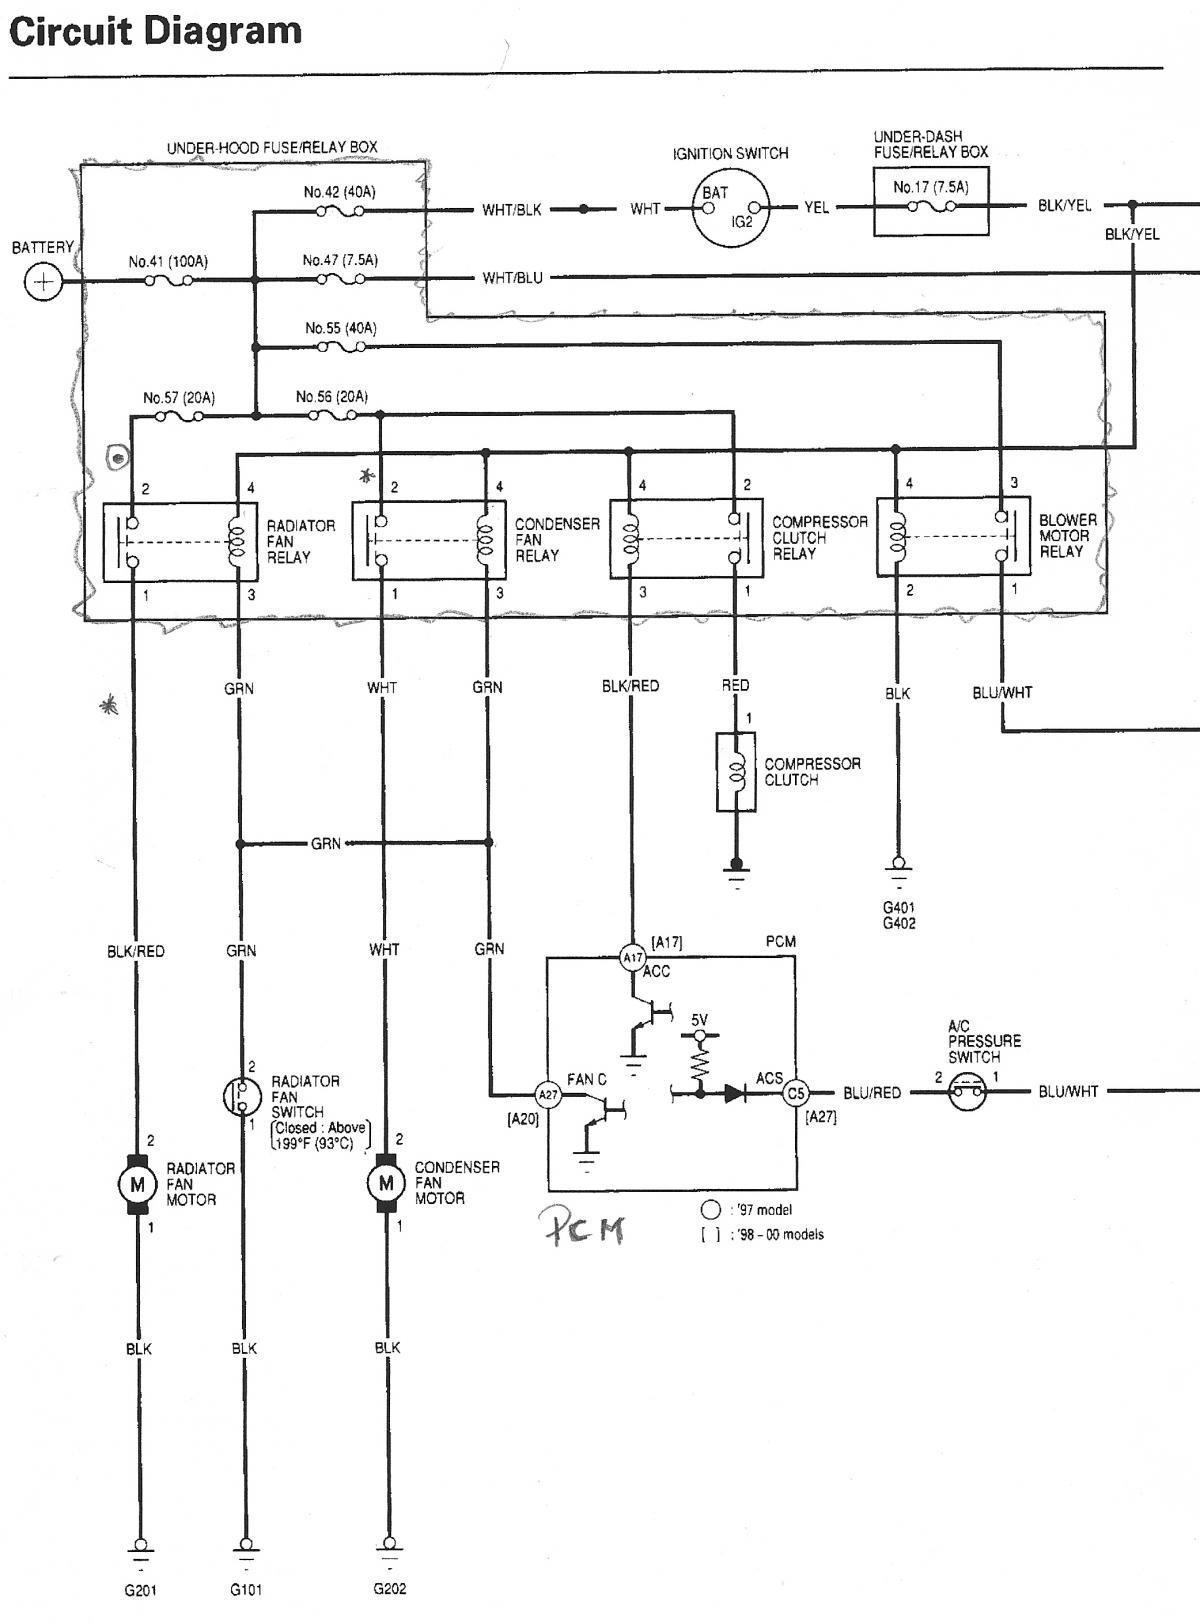 2001 Honda Accord Wiring Diagram | how small can words be tattooed news